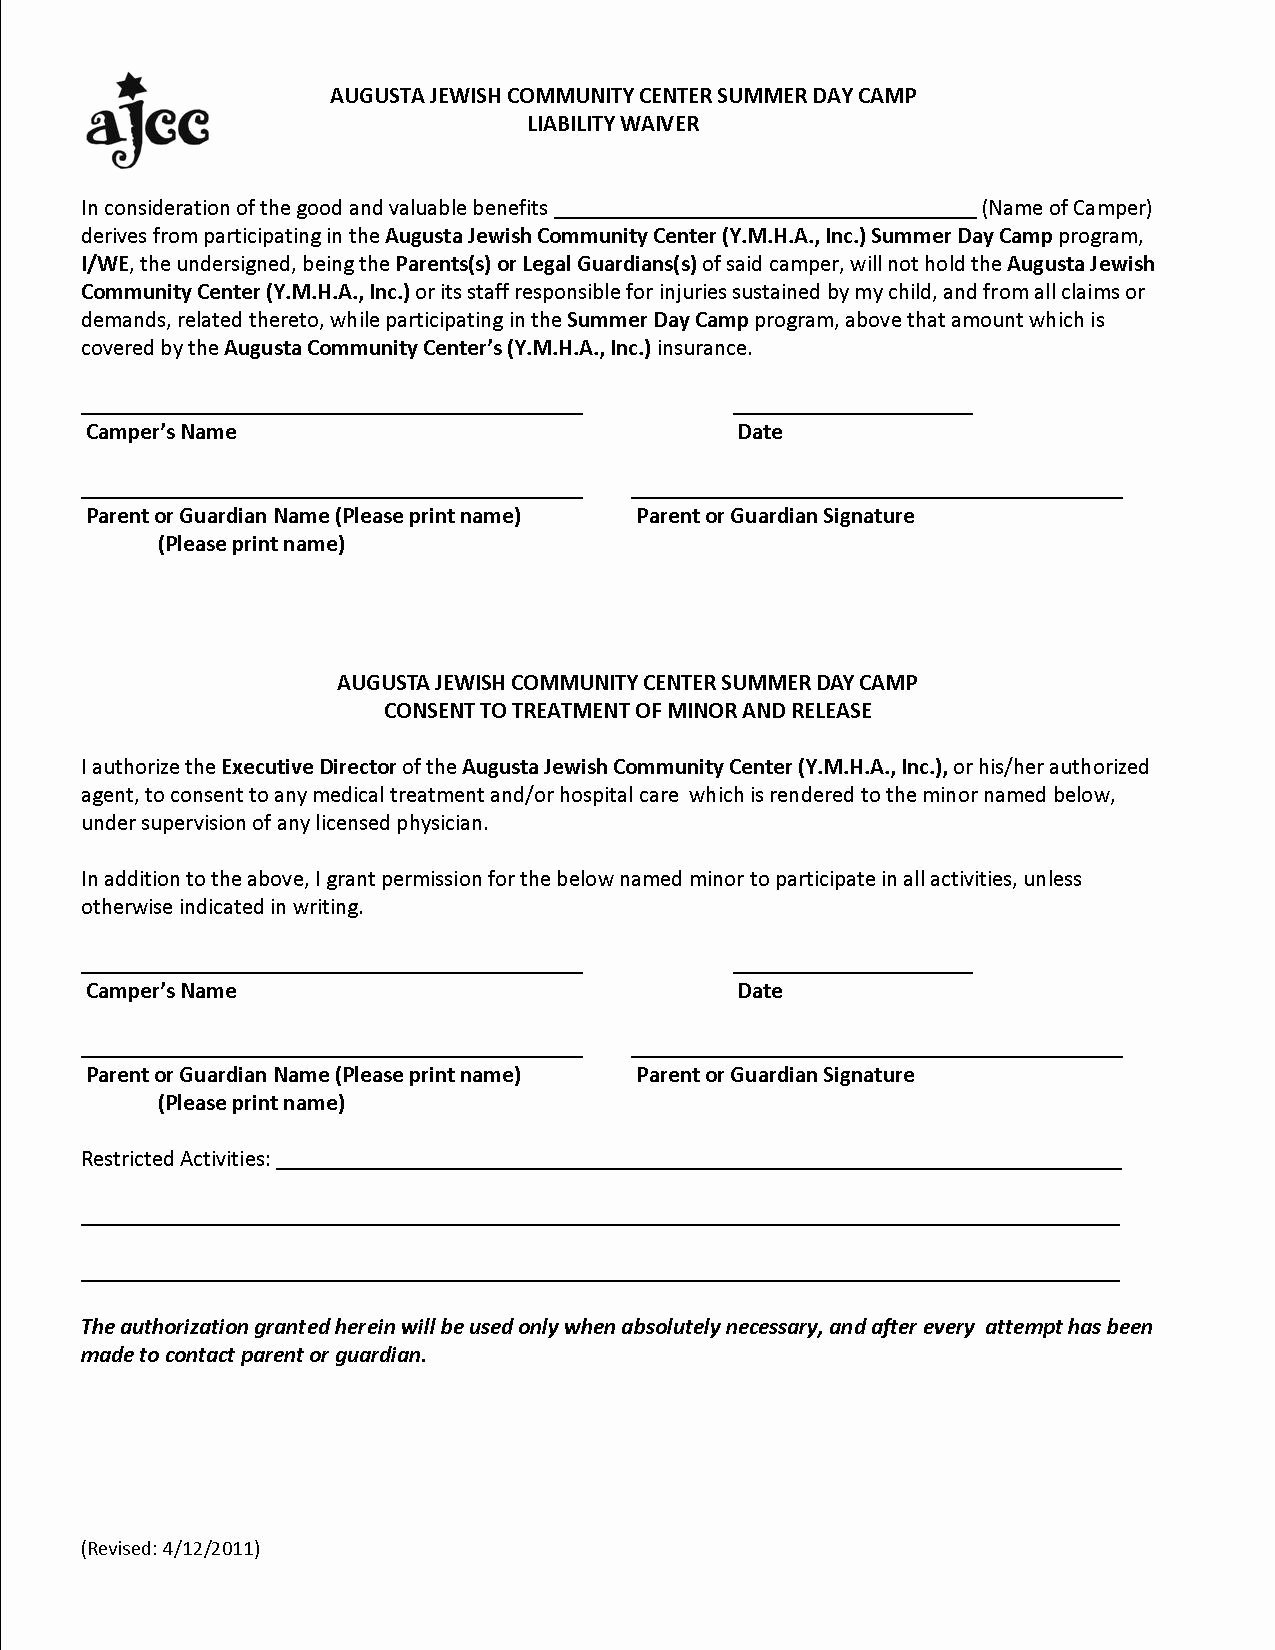 Image Release form Template Fresh Free Printable Liability form form Generic